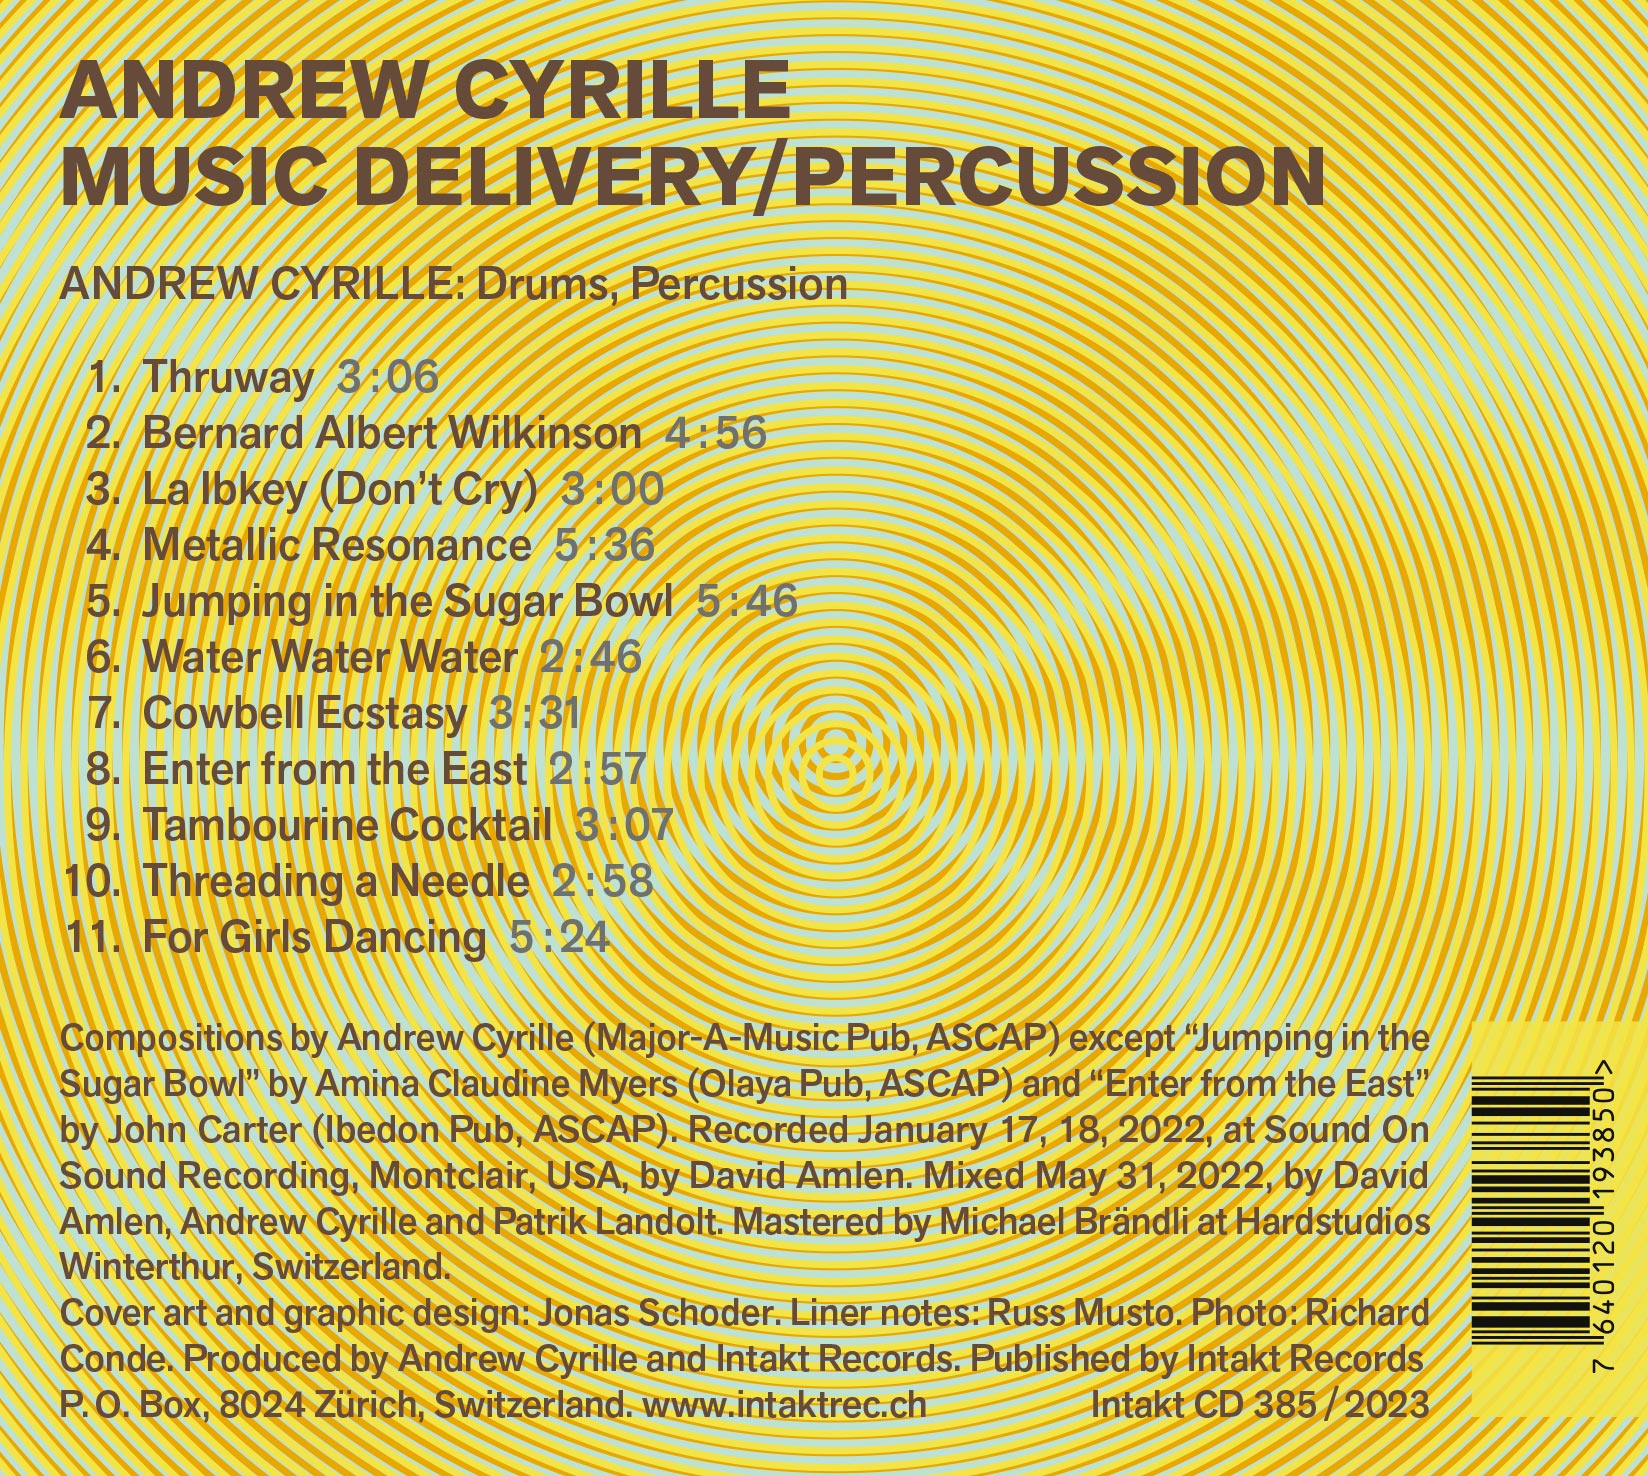 ANDREW CYRILLE
MUSIC DELIVERY / PERCUSSION cover back